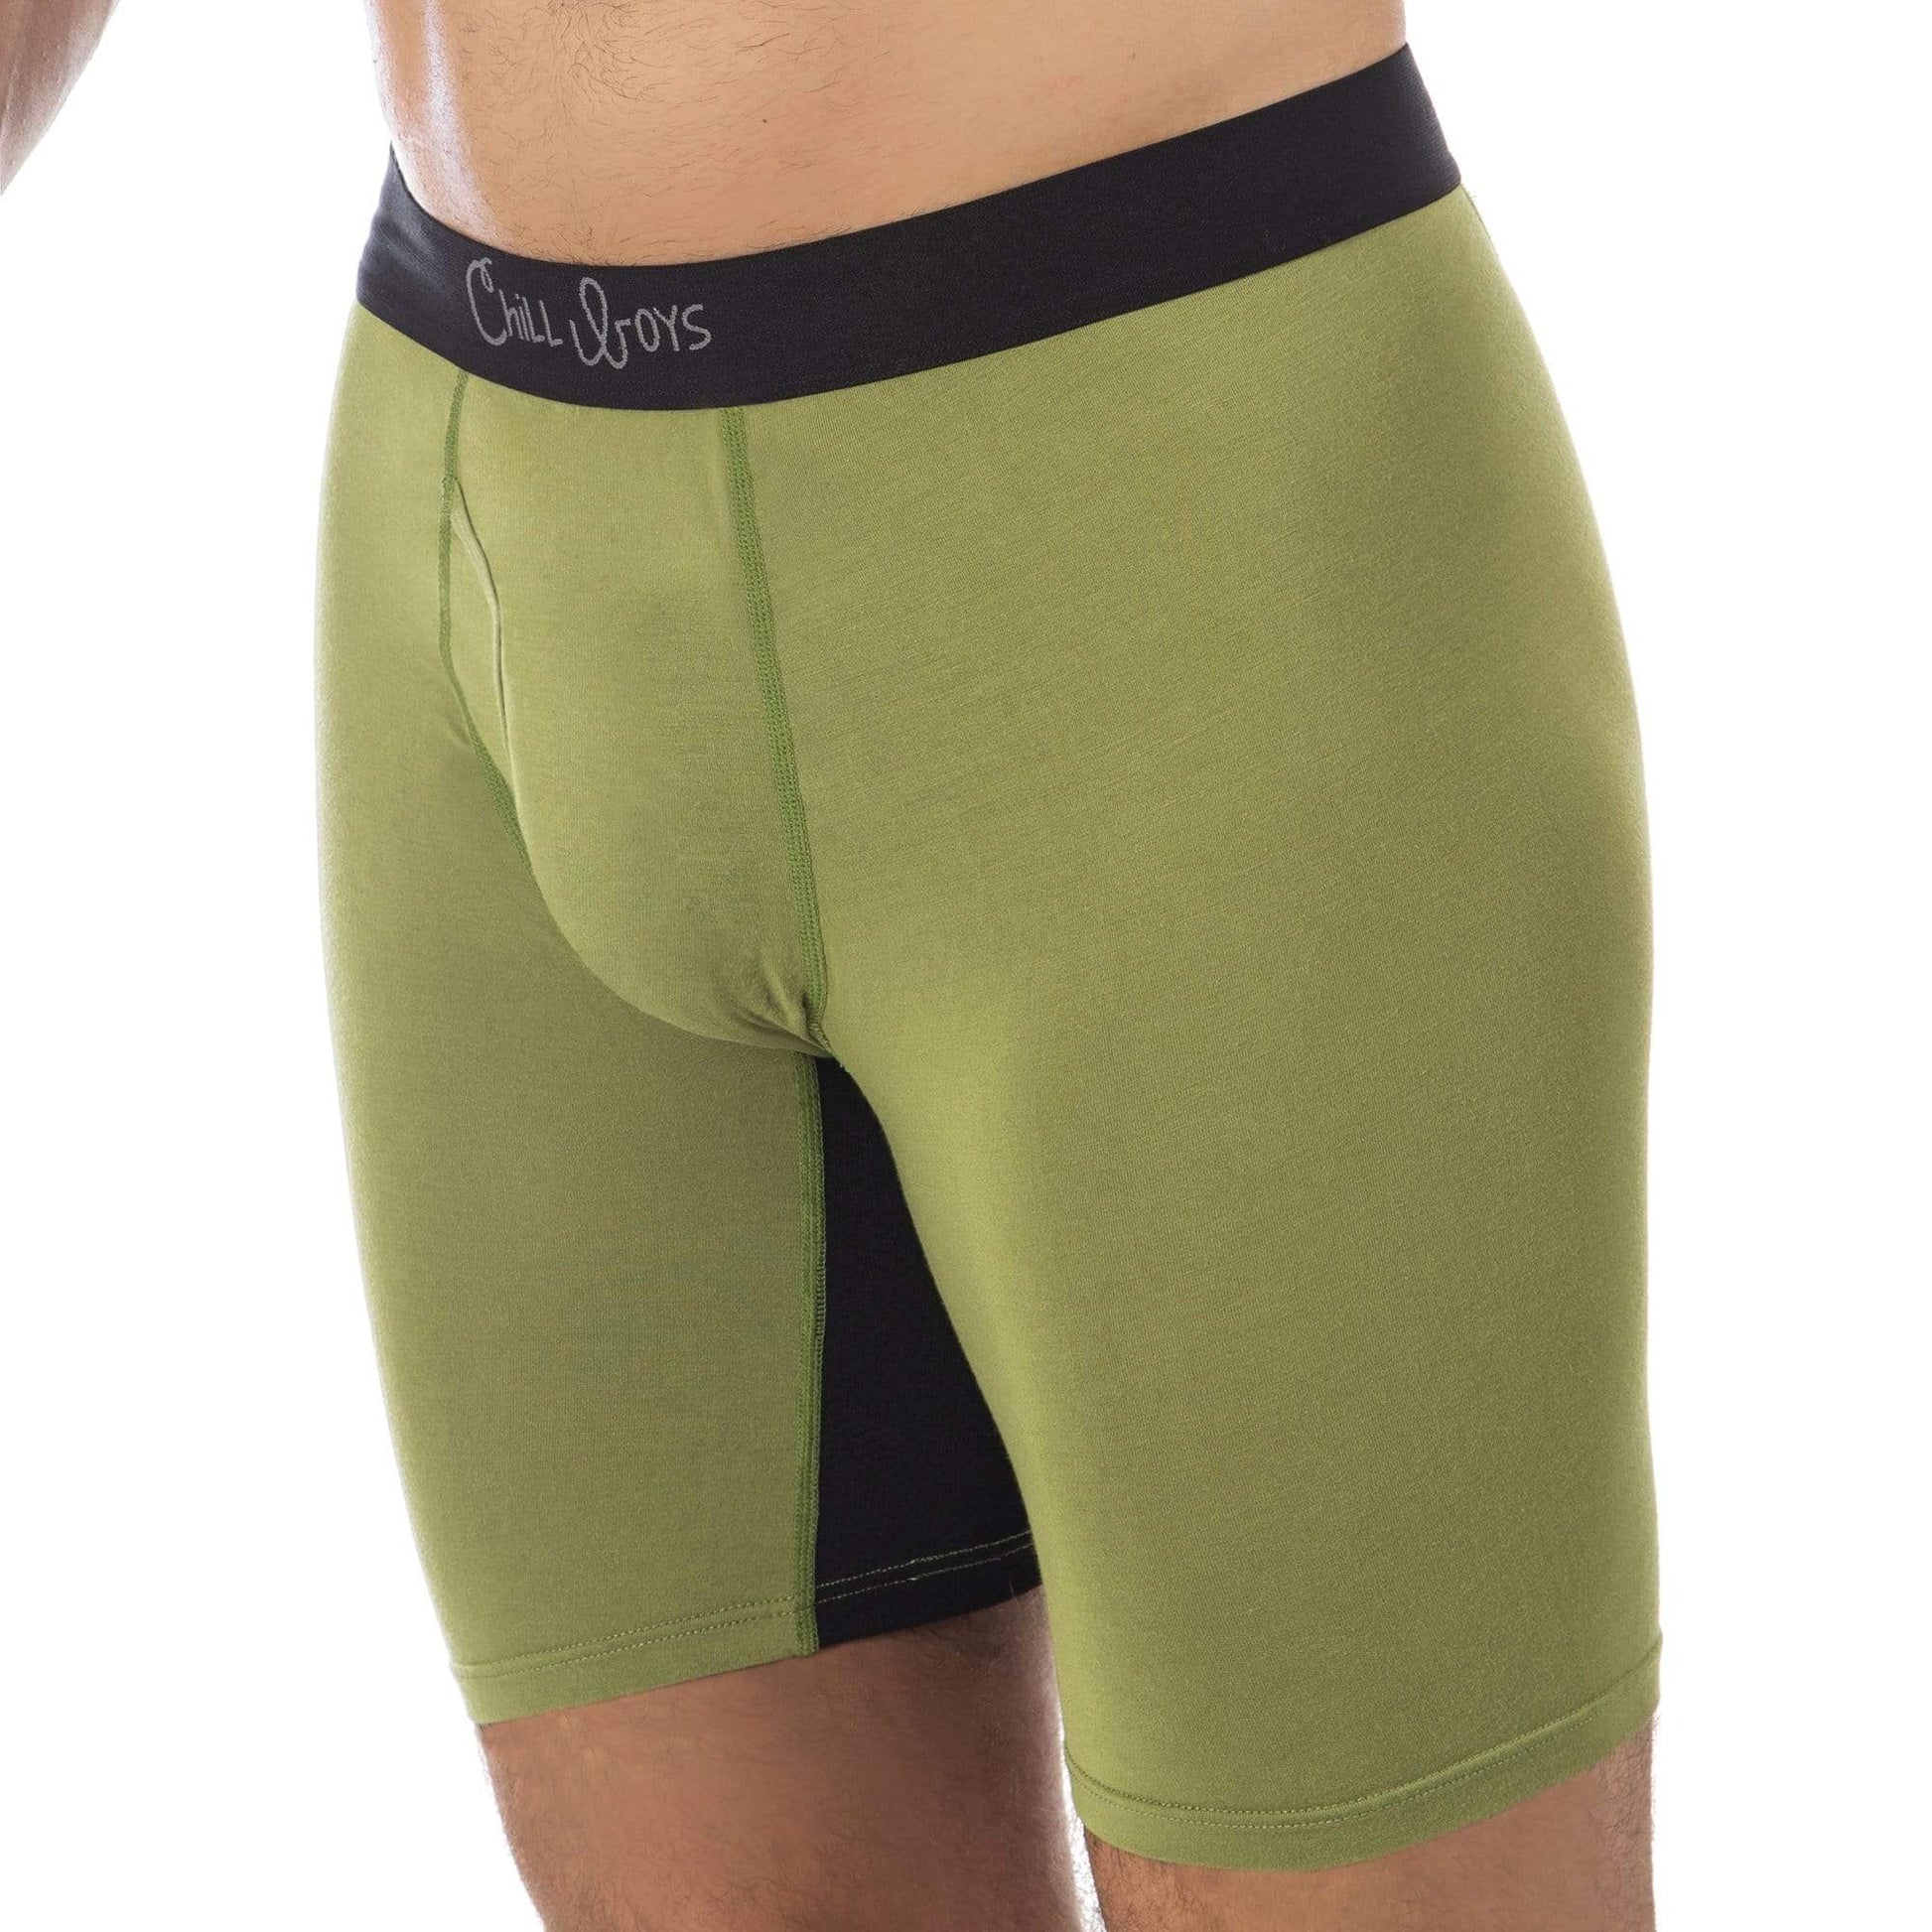 Super Soft Boxer Briefs Anti-Chafe & No Ride Up Design - Two Pack With &  Without Pouch - Green, Yellow & Orange